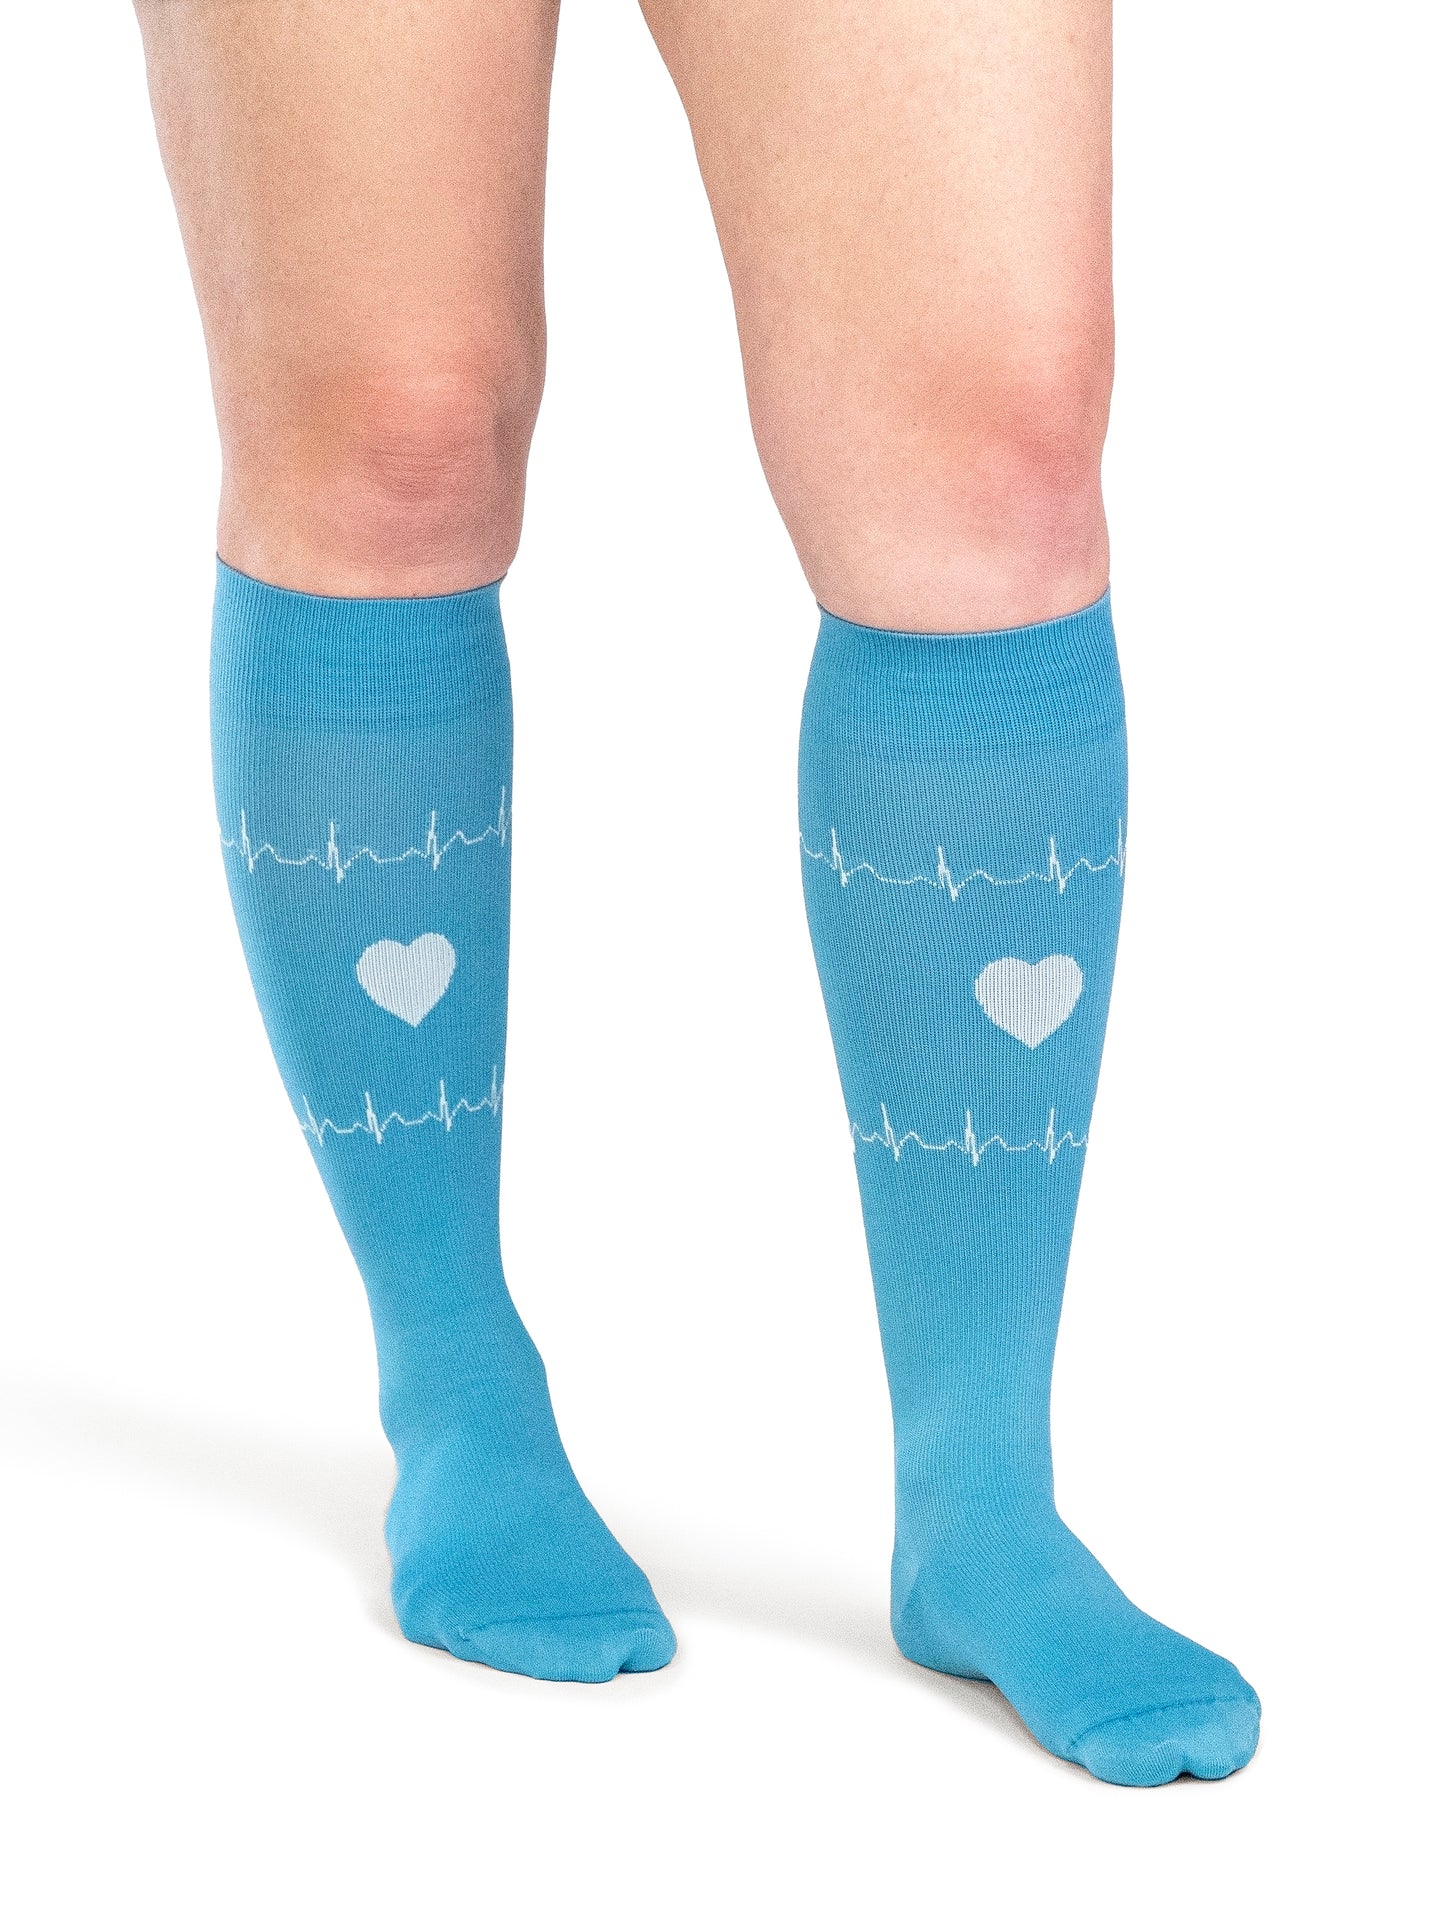 Woman wearing Sigvaris Well-being Microfiber Shades compression socks in the color Nurse Blue